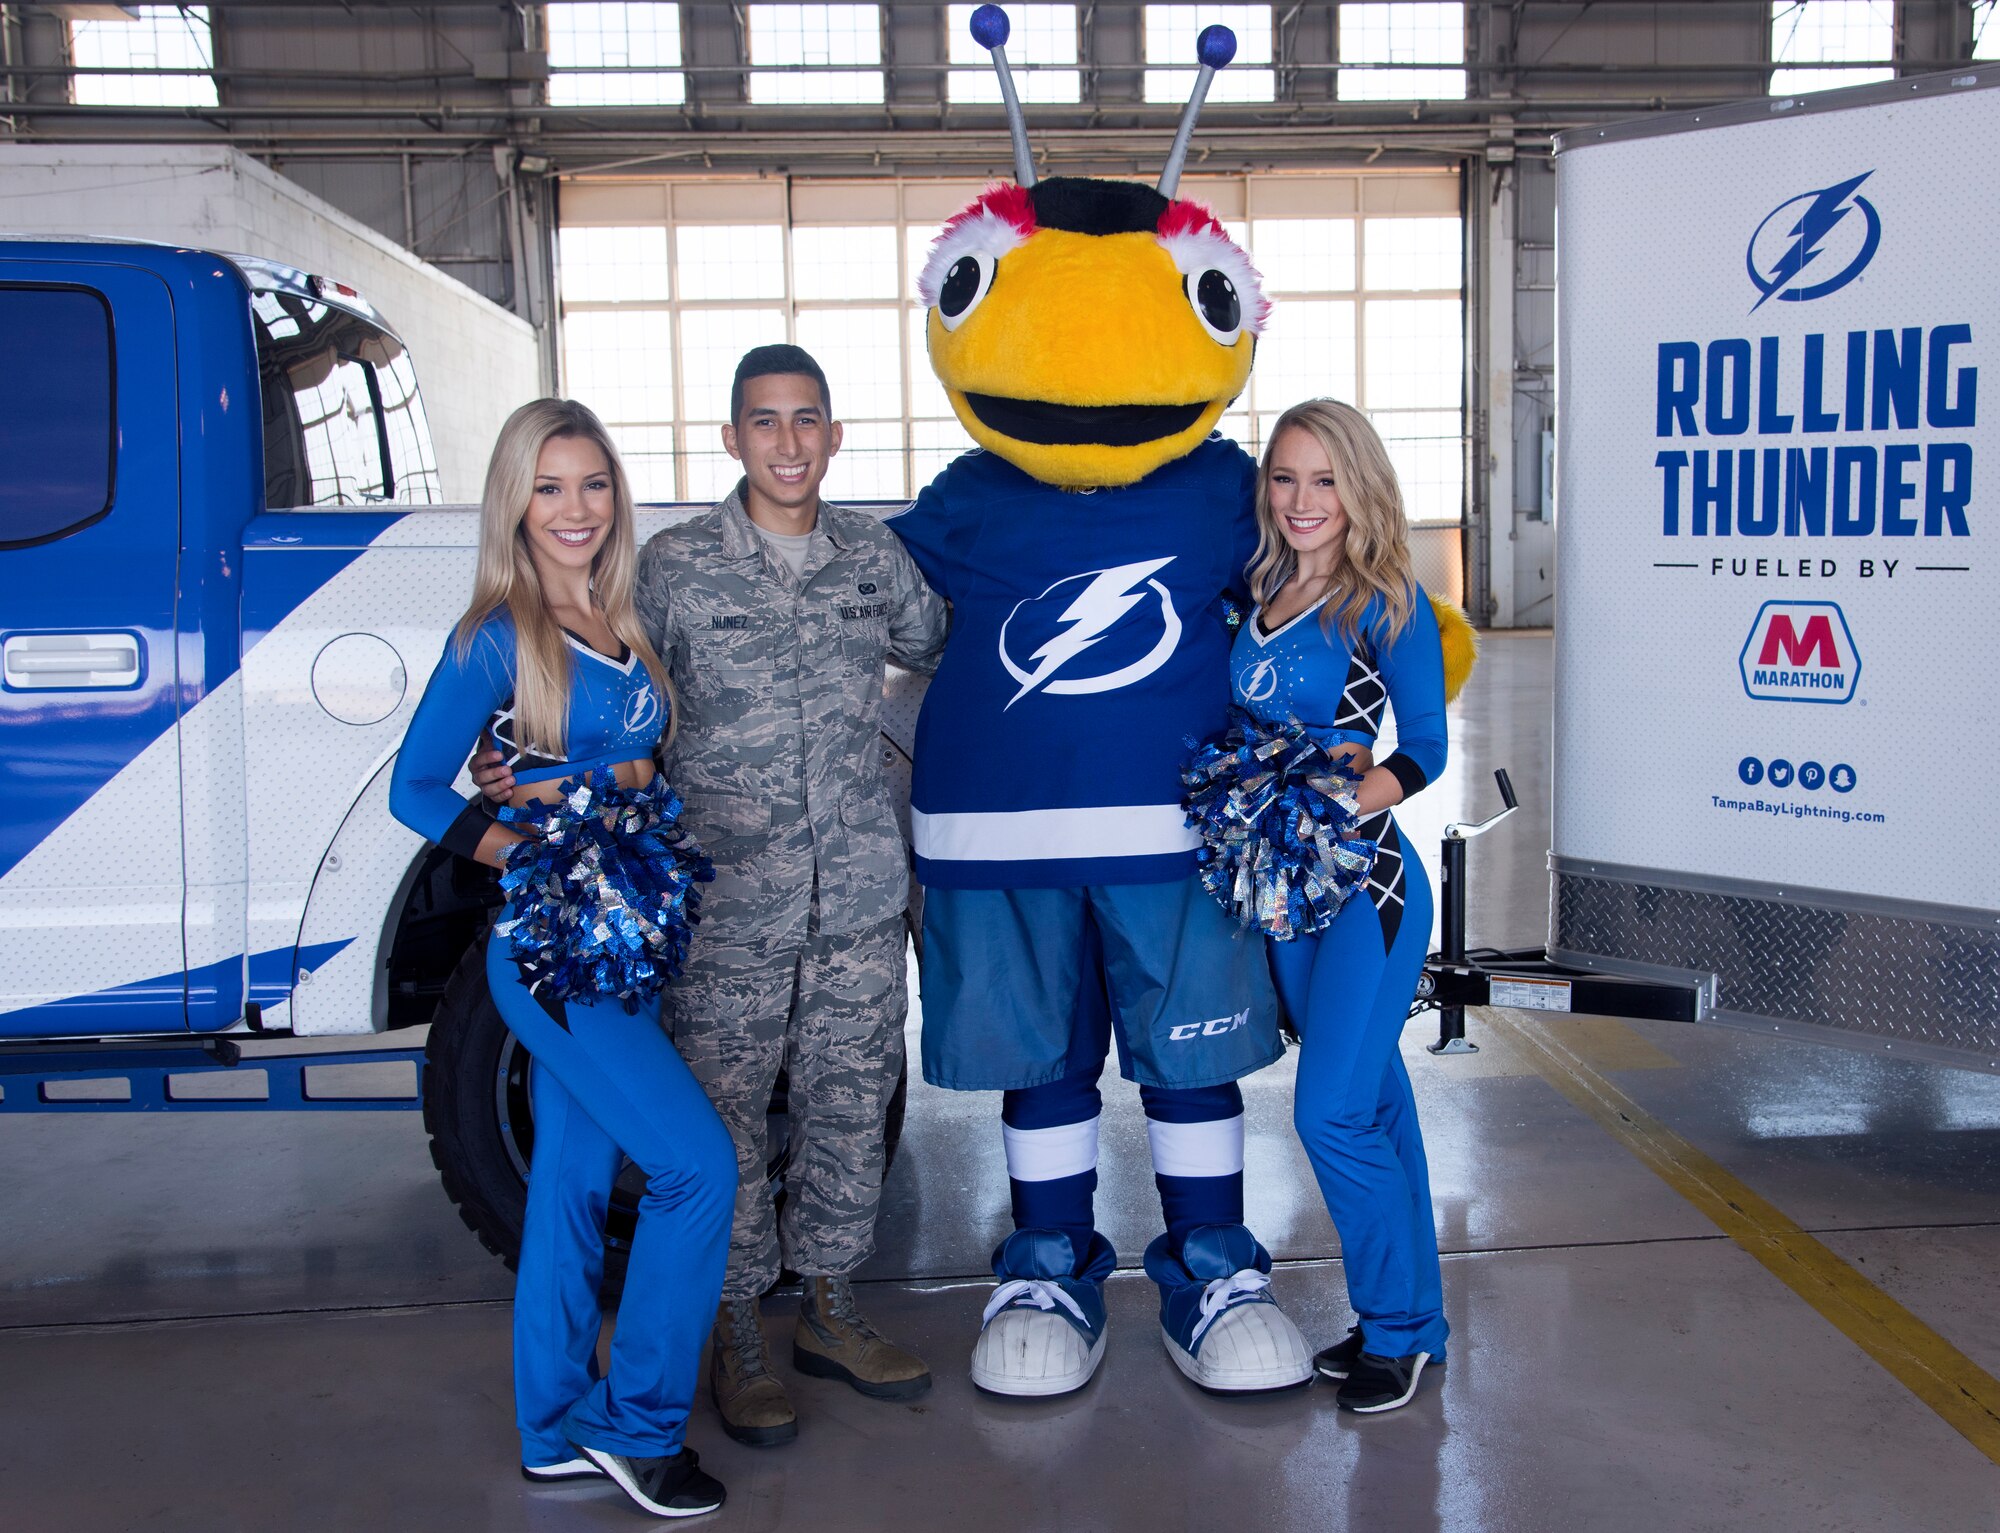 U.S. Air Force Airman 1st Class Caleb Nunez, a photojournalist assigned to the 6th Air Mobility Wing, poses for a photo with the Tampa Bay Lightning girls and team mascot at MacDill Air Force Base, Florida, Oct. 25, 2018.